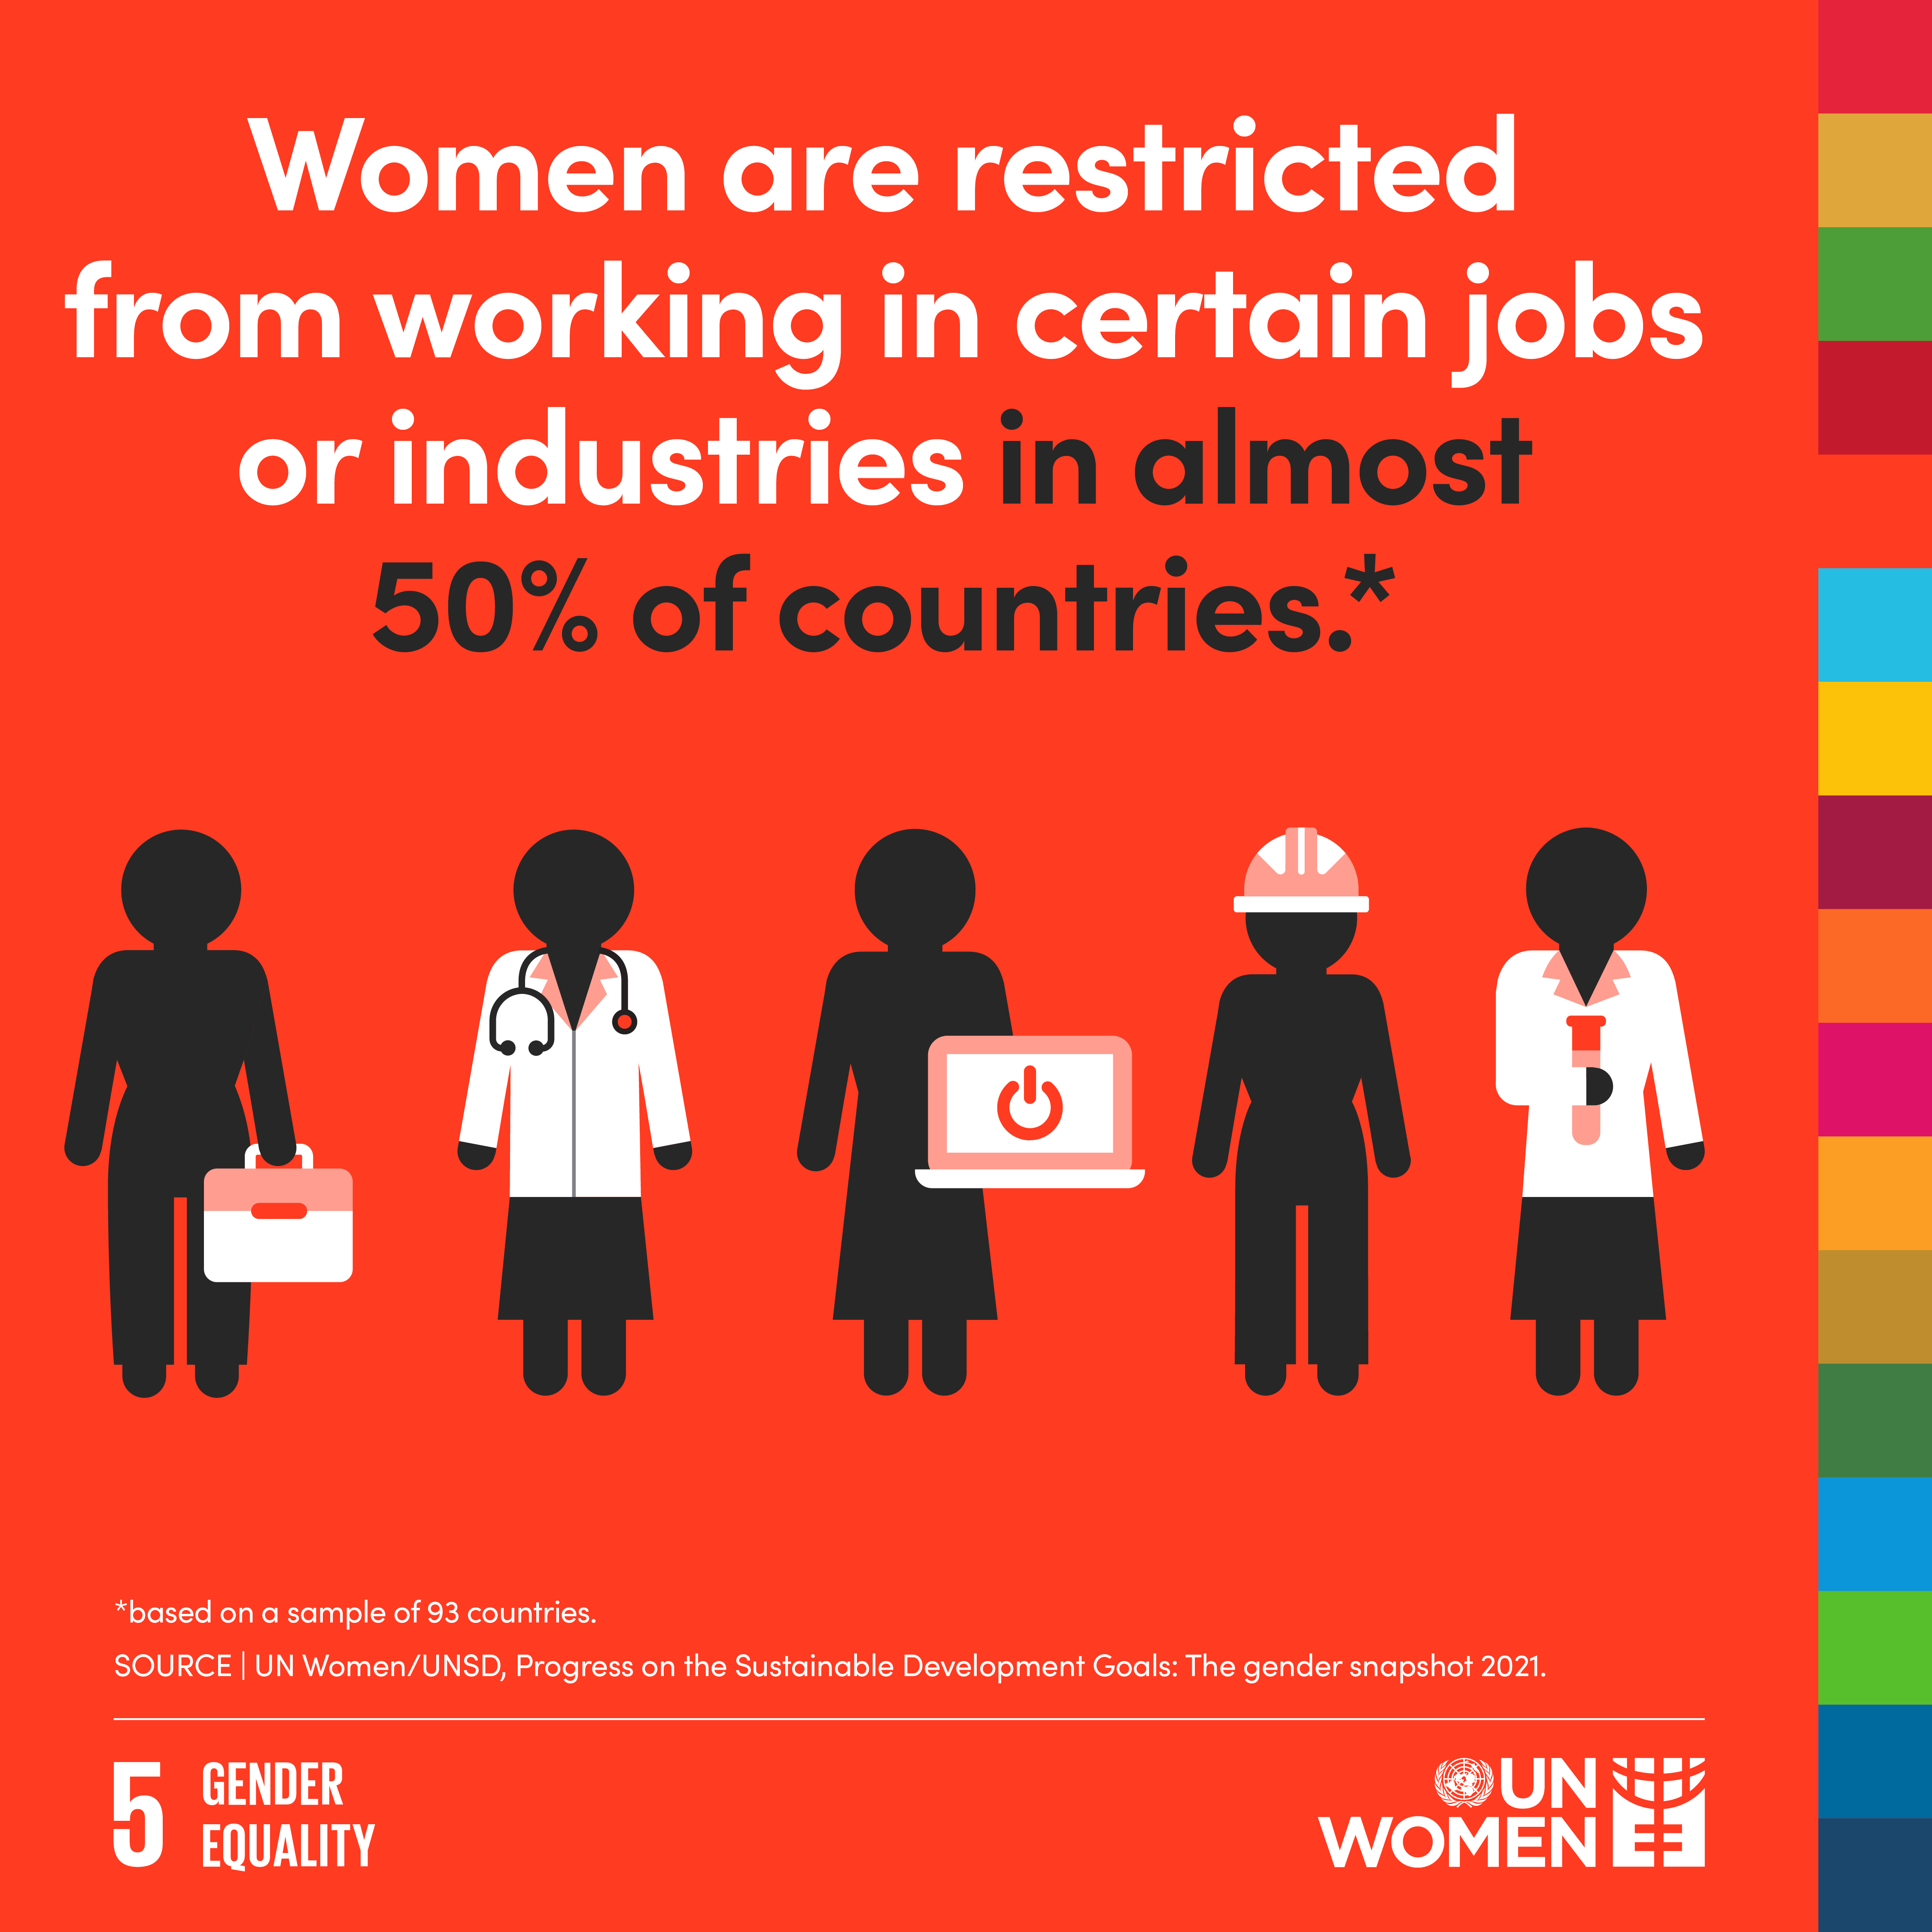 Women are restricted from working in certain jobs or industries in almost 50% of countries.